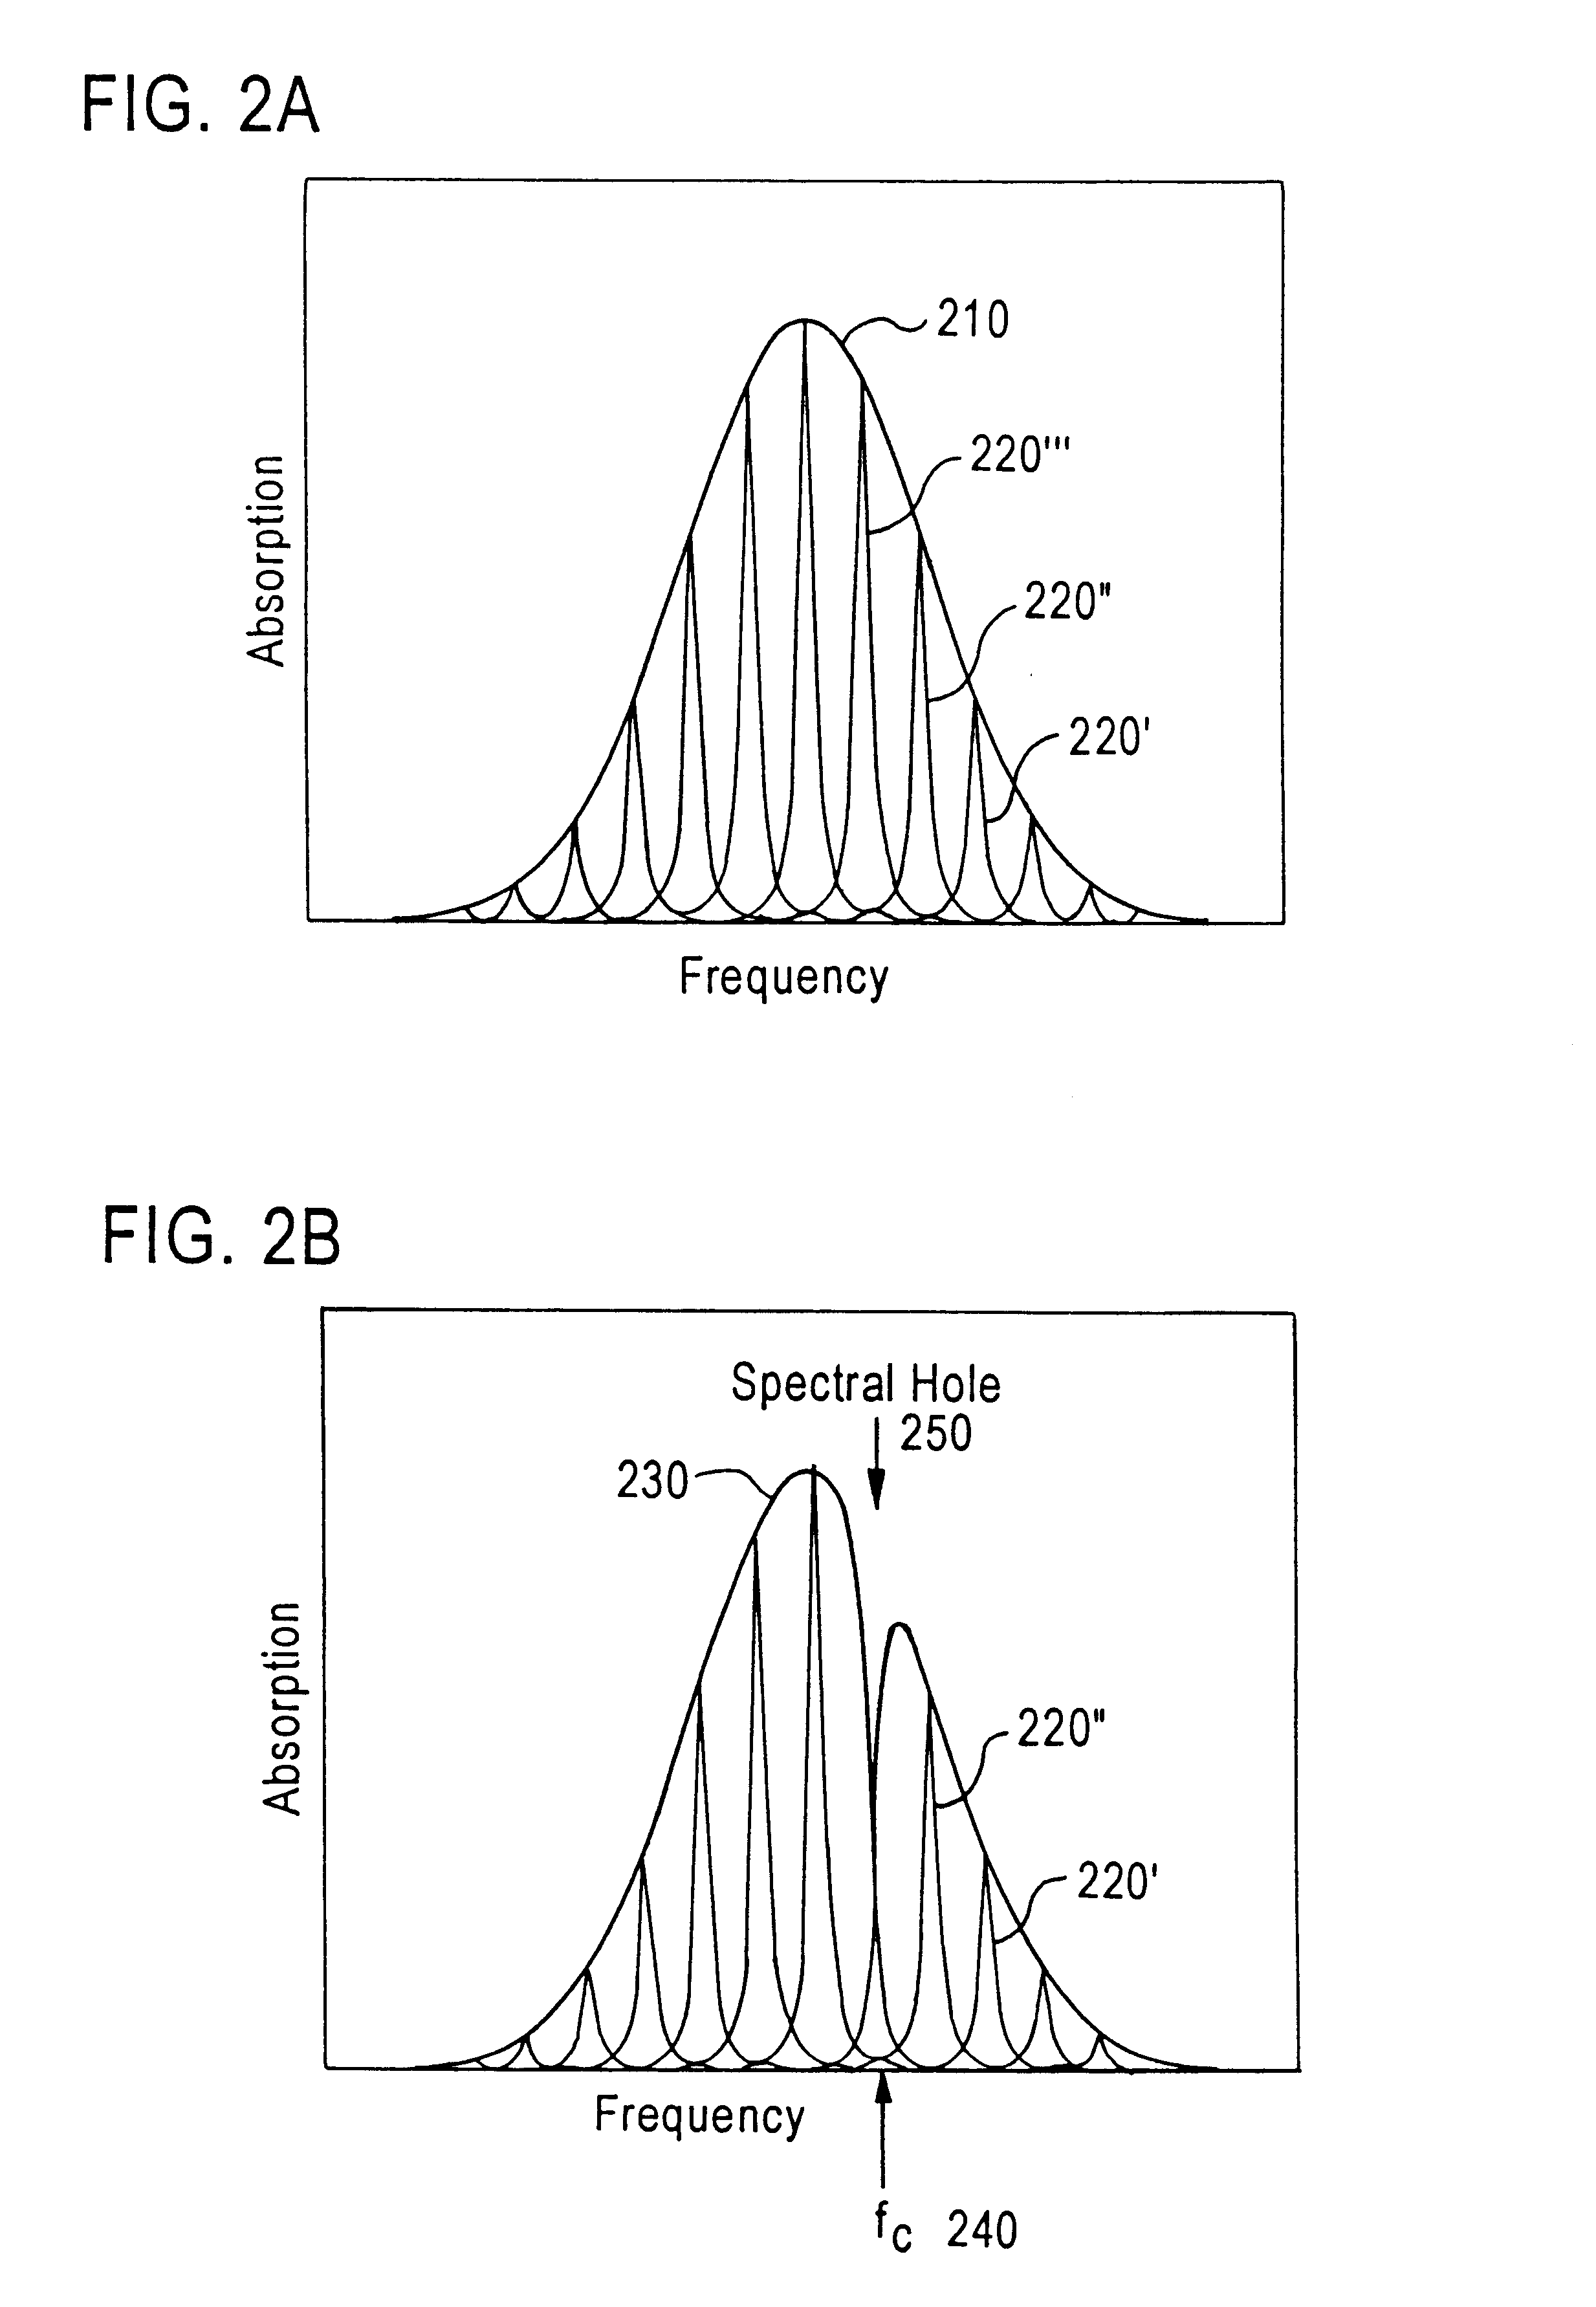 Laser frequency stabilizer using transient spectral hole burning